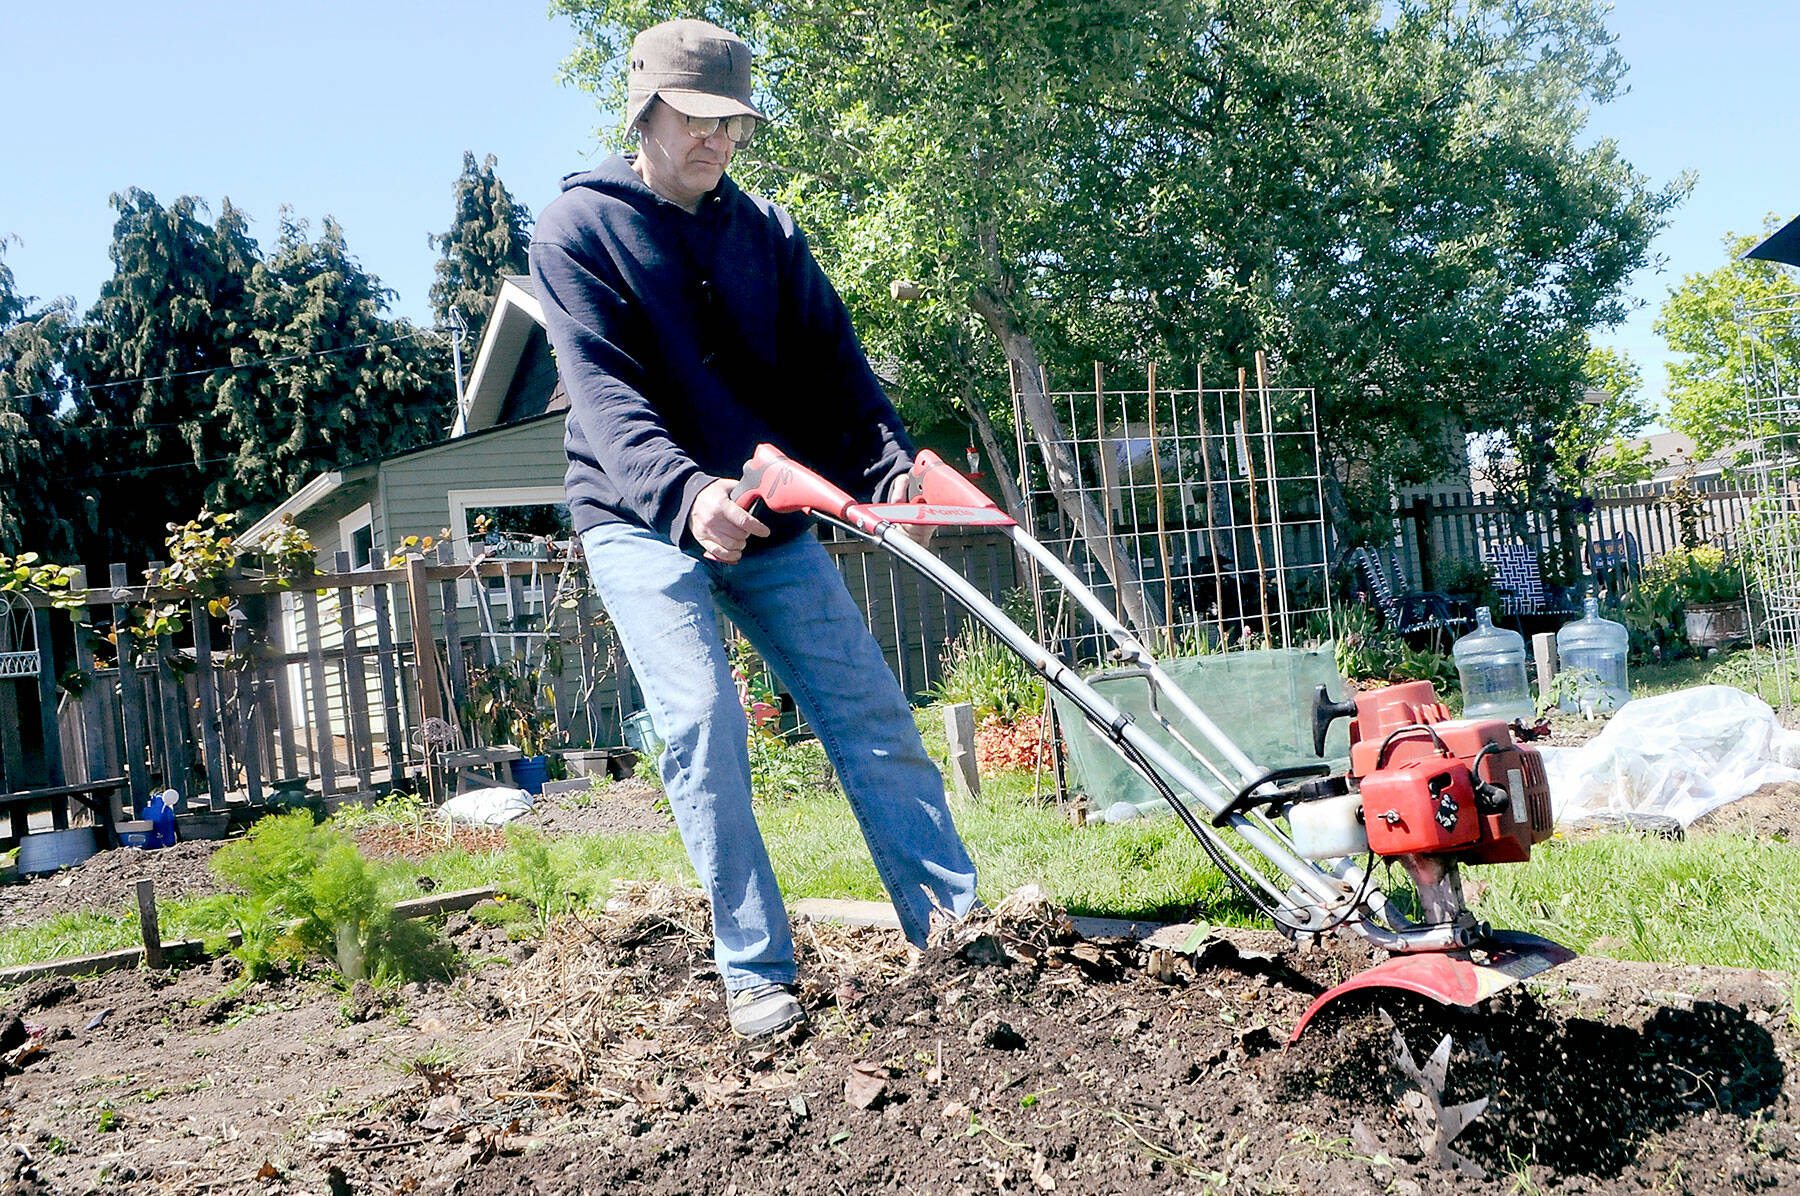 David Fox of Port Angeles uses a rotary tiller on Thursday to prepare soil for planting on a plot in the Fifth Street Community Garden in Port Angeles. (Keith Thorpe/Peninsula Daily News)